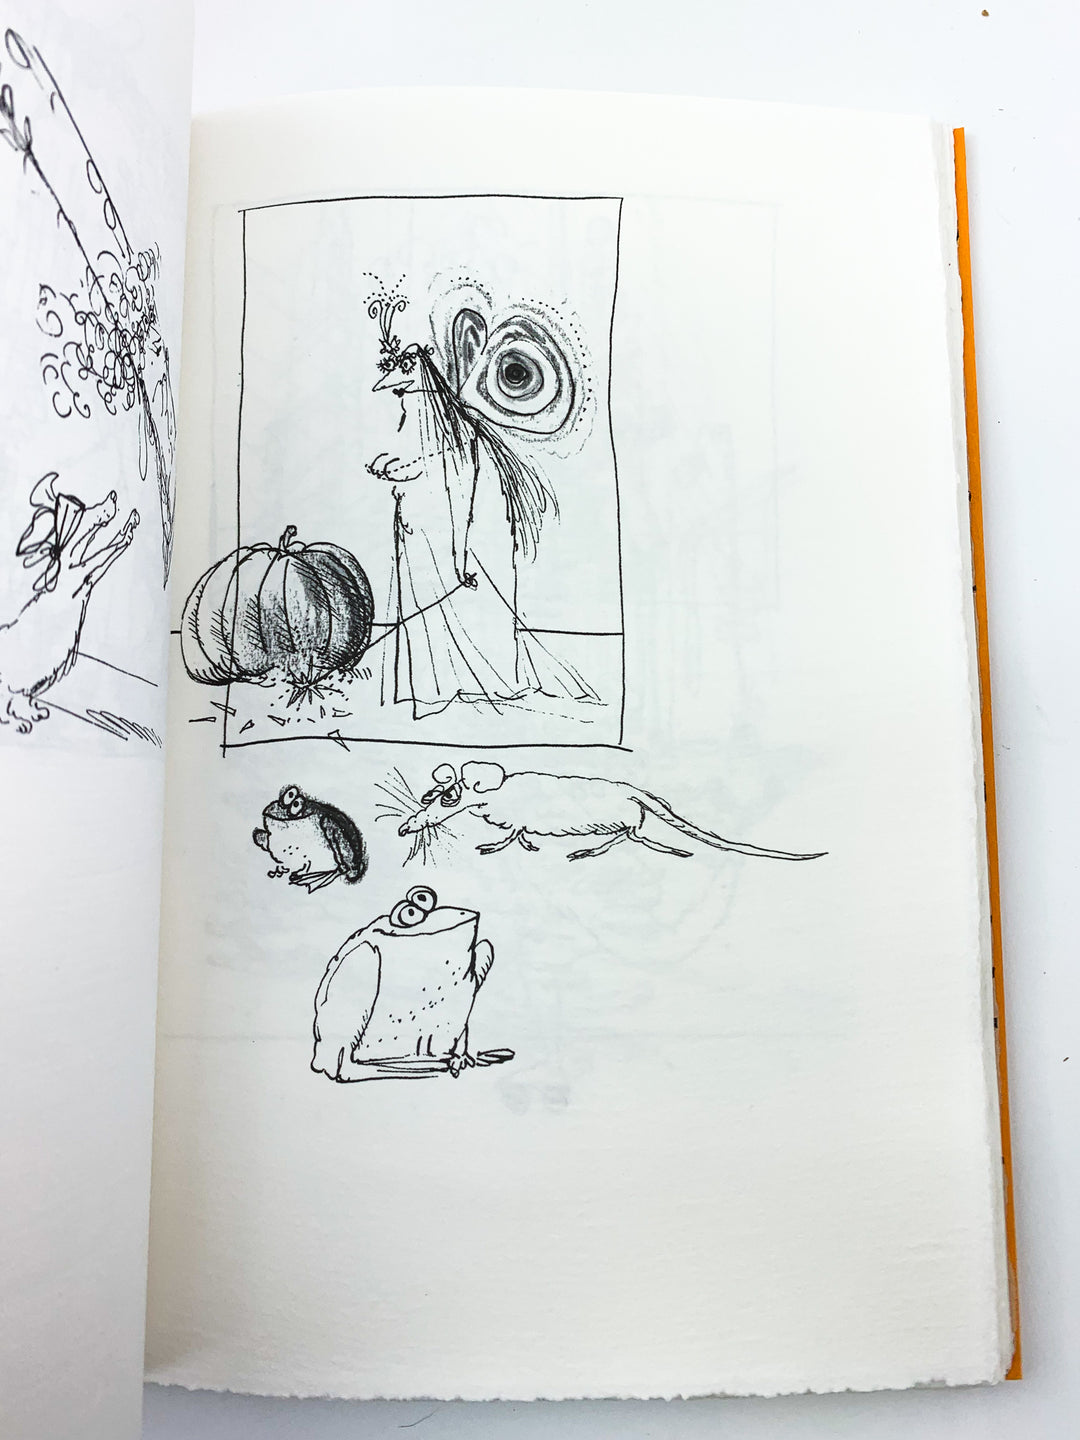 Searle, Ronald - The Predatory Bite of the Steel Nib - The Scrapbook Drawings of Ronald Searle - SIGNED | image6